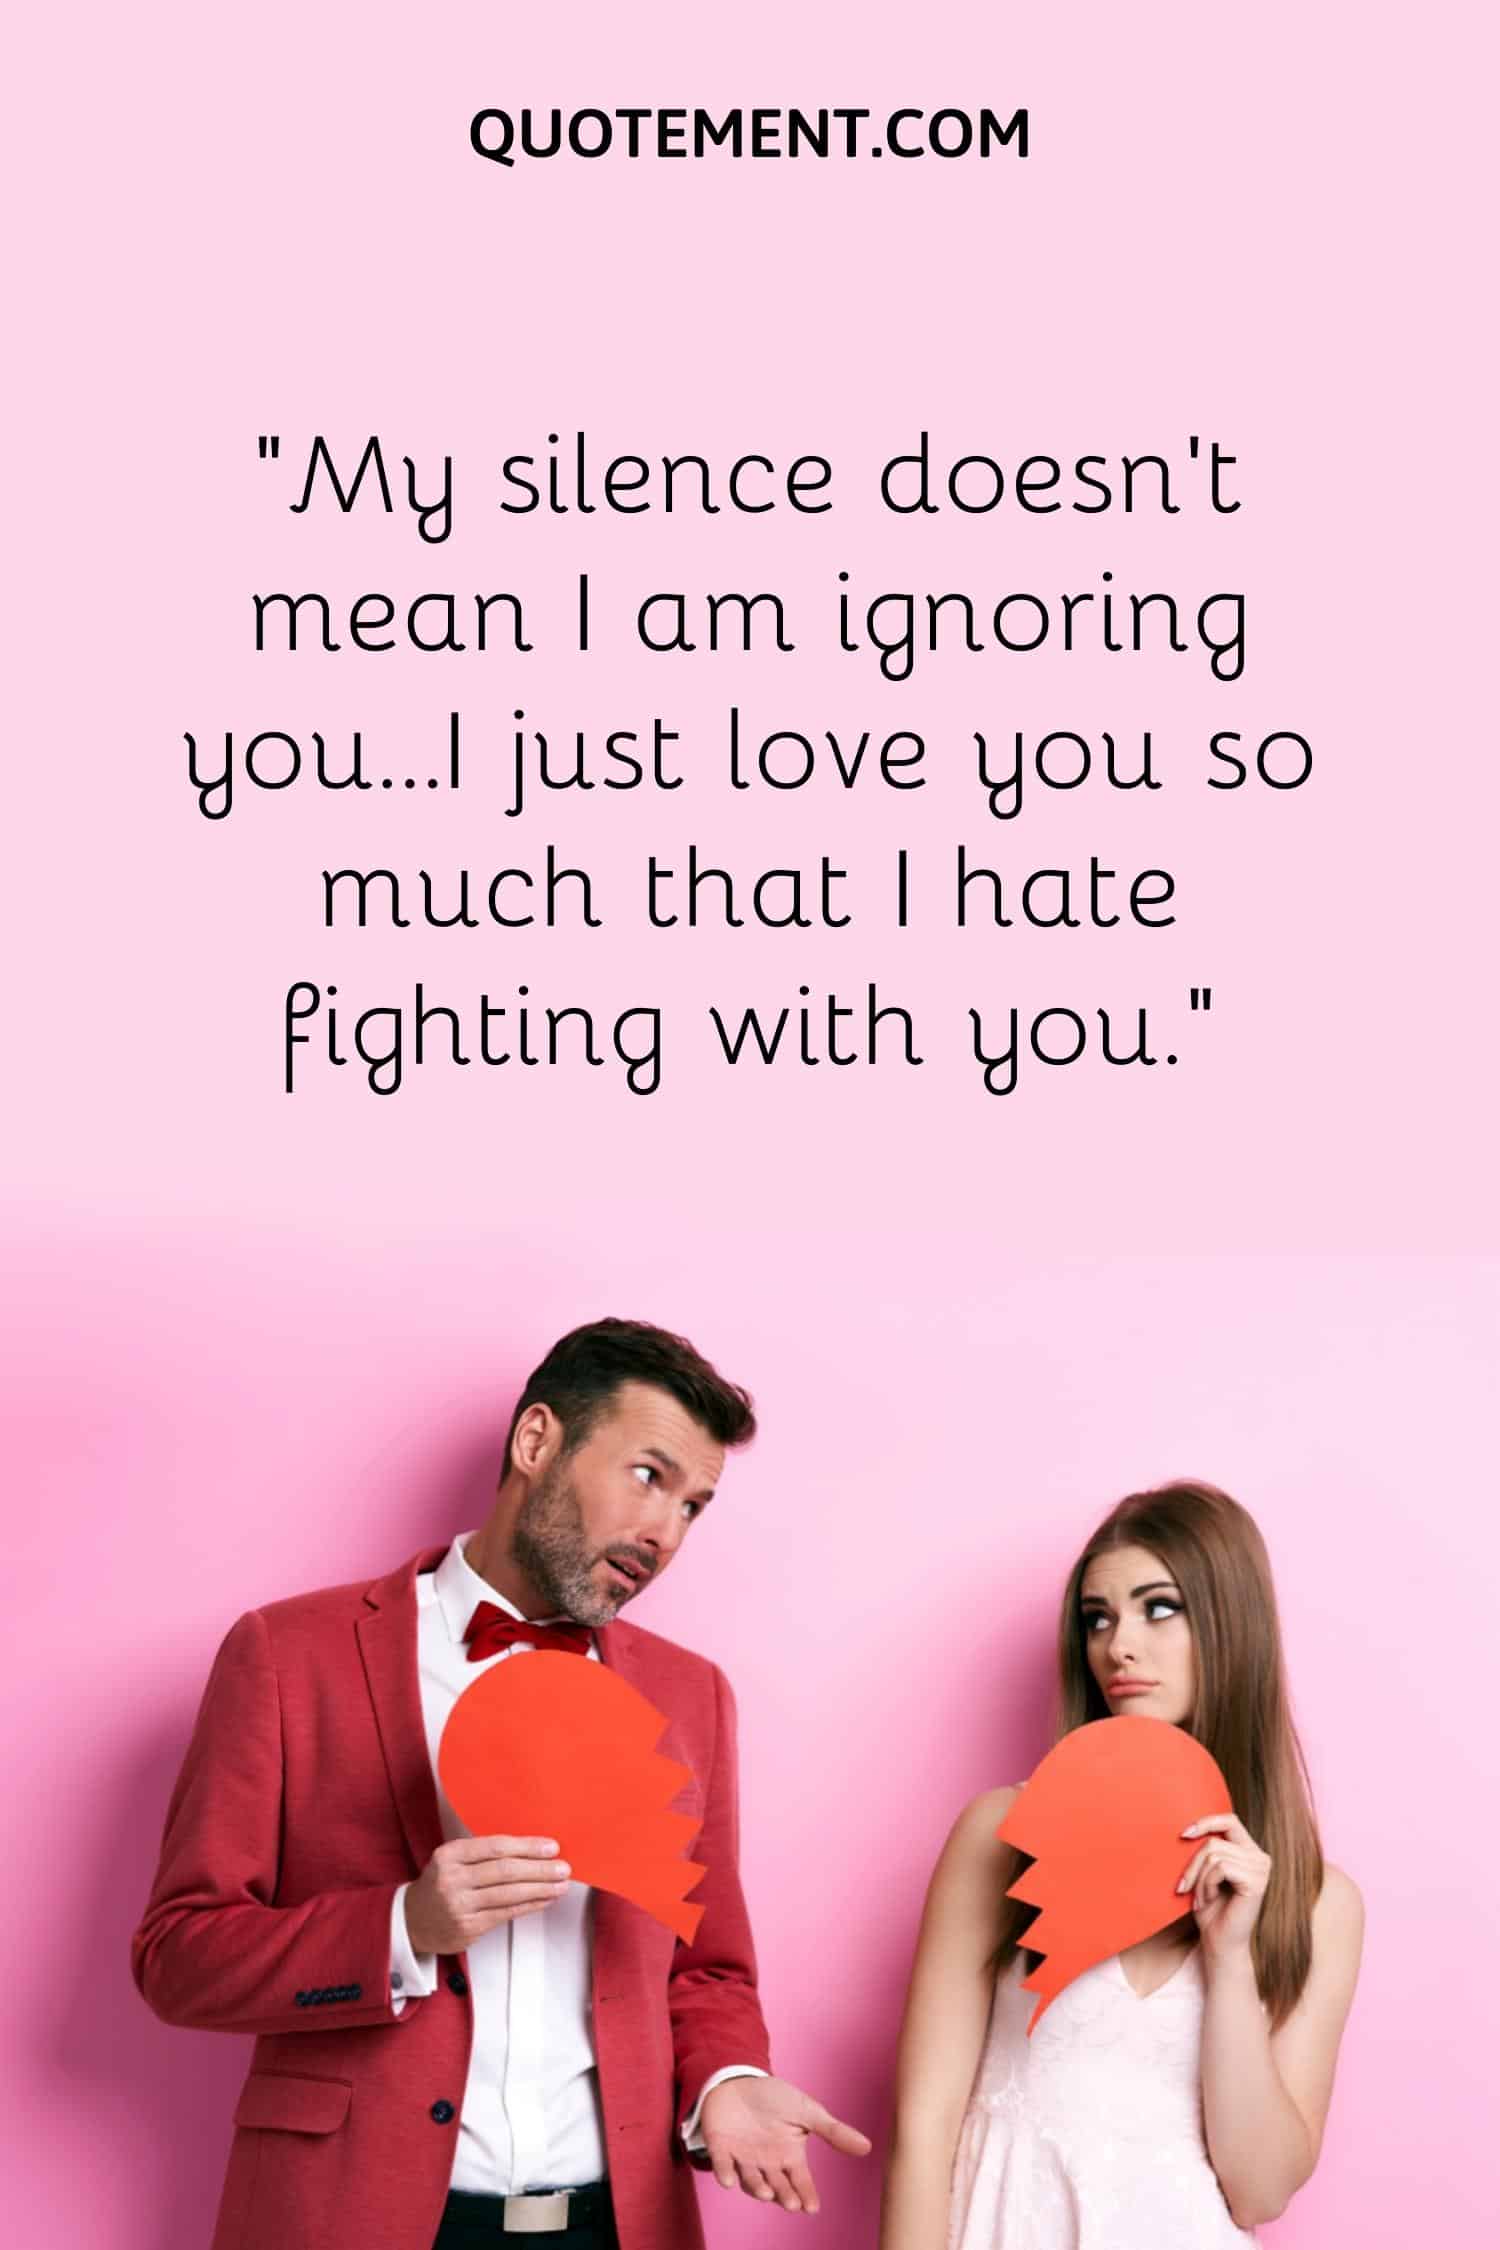 “My silence doesn’t mean I am ignoring you…I just love you so much that I hate fighting with you.”